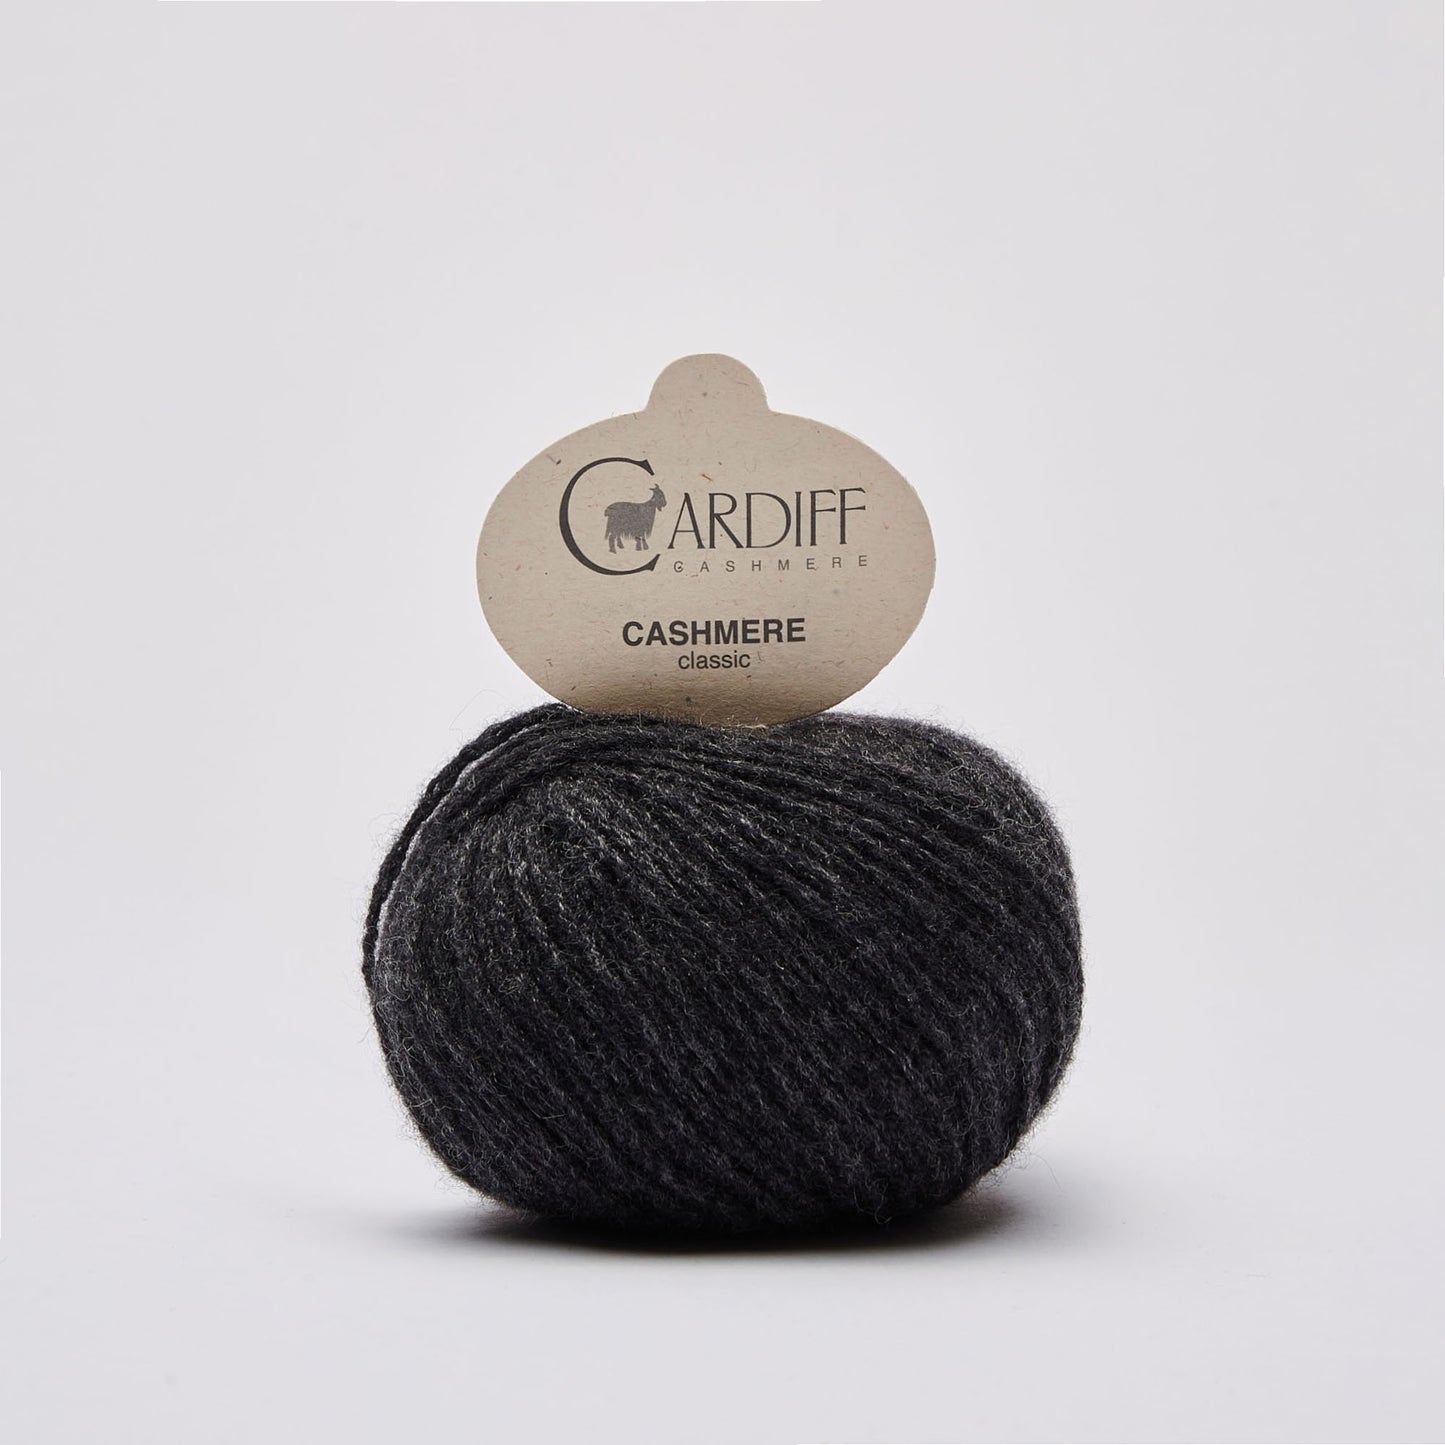 Cardiff CLASSIC gentle yarn, 520, ANTRACITE, comp: 100% Cashmere